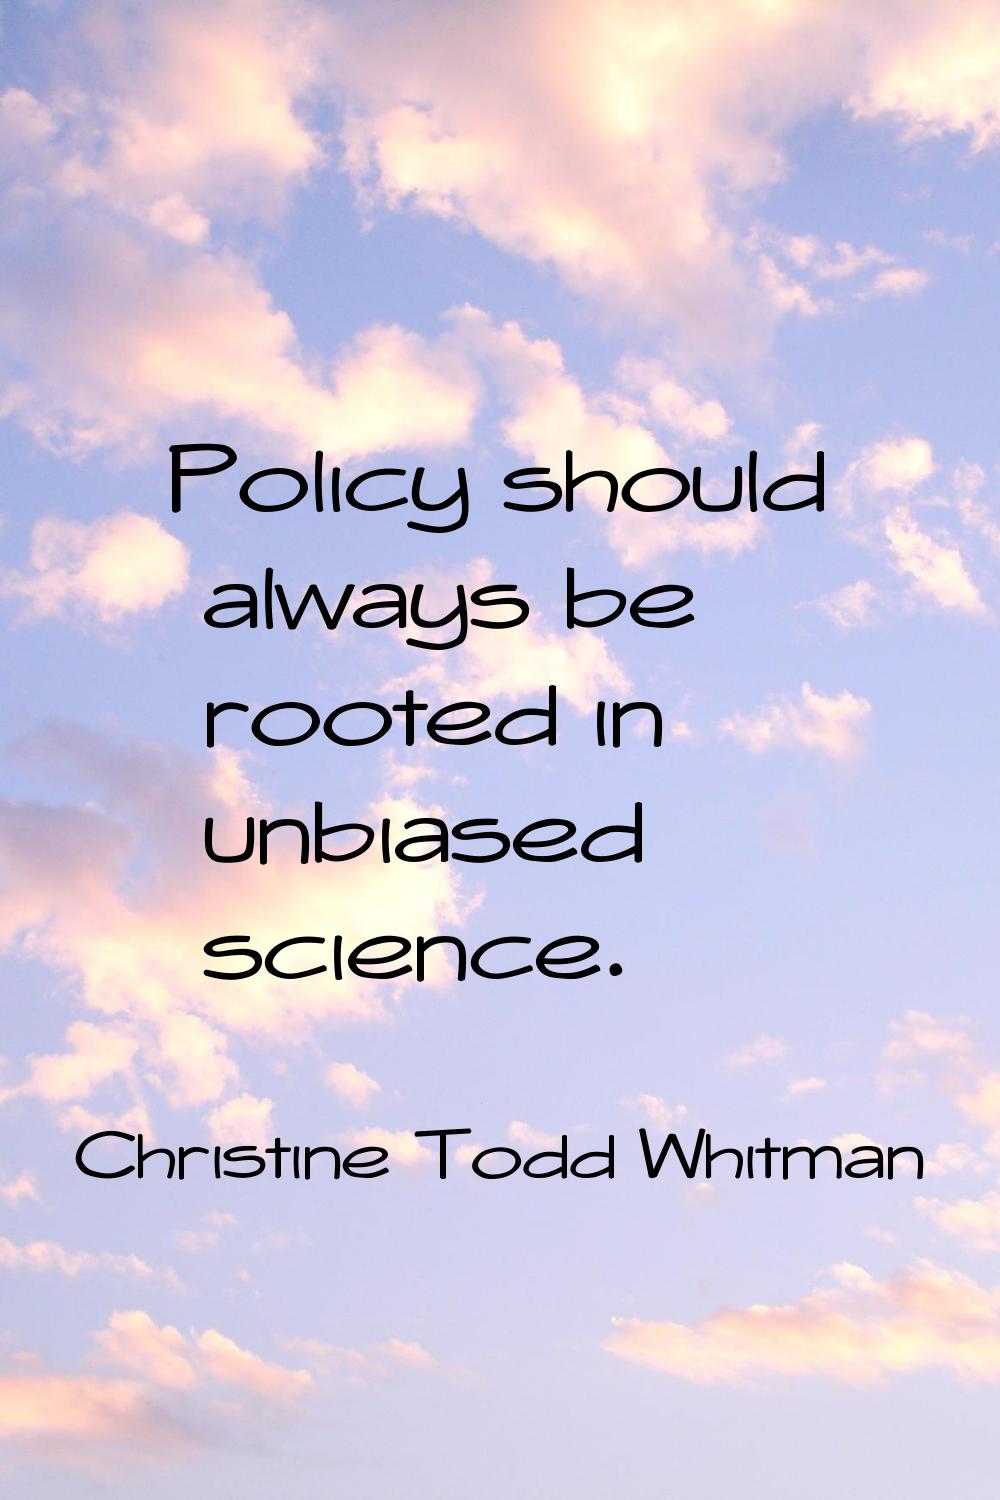 Policy should always be rooted in unbiased science.